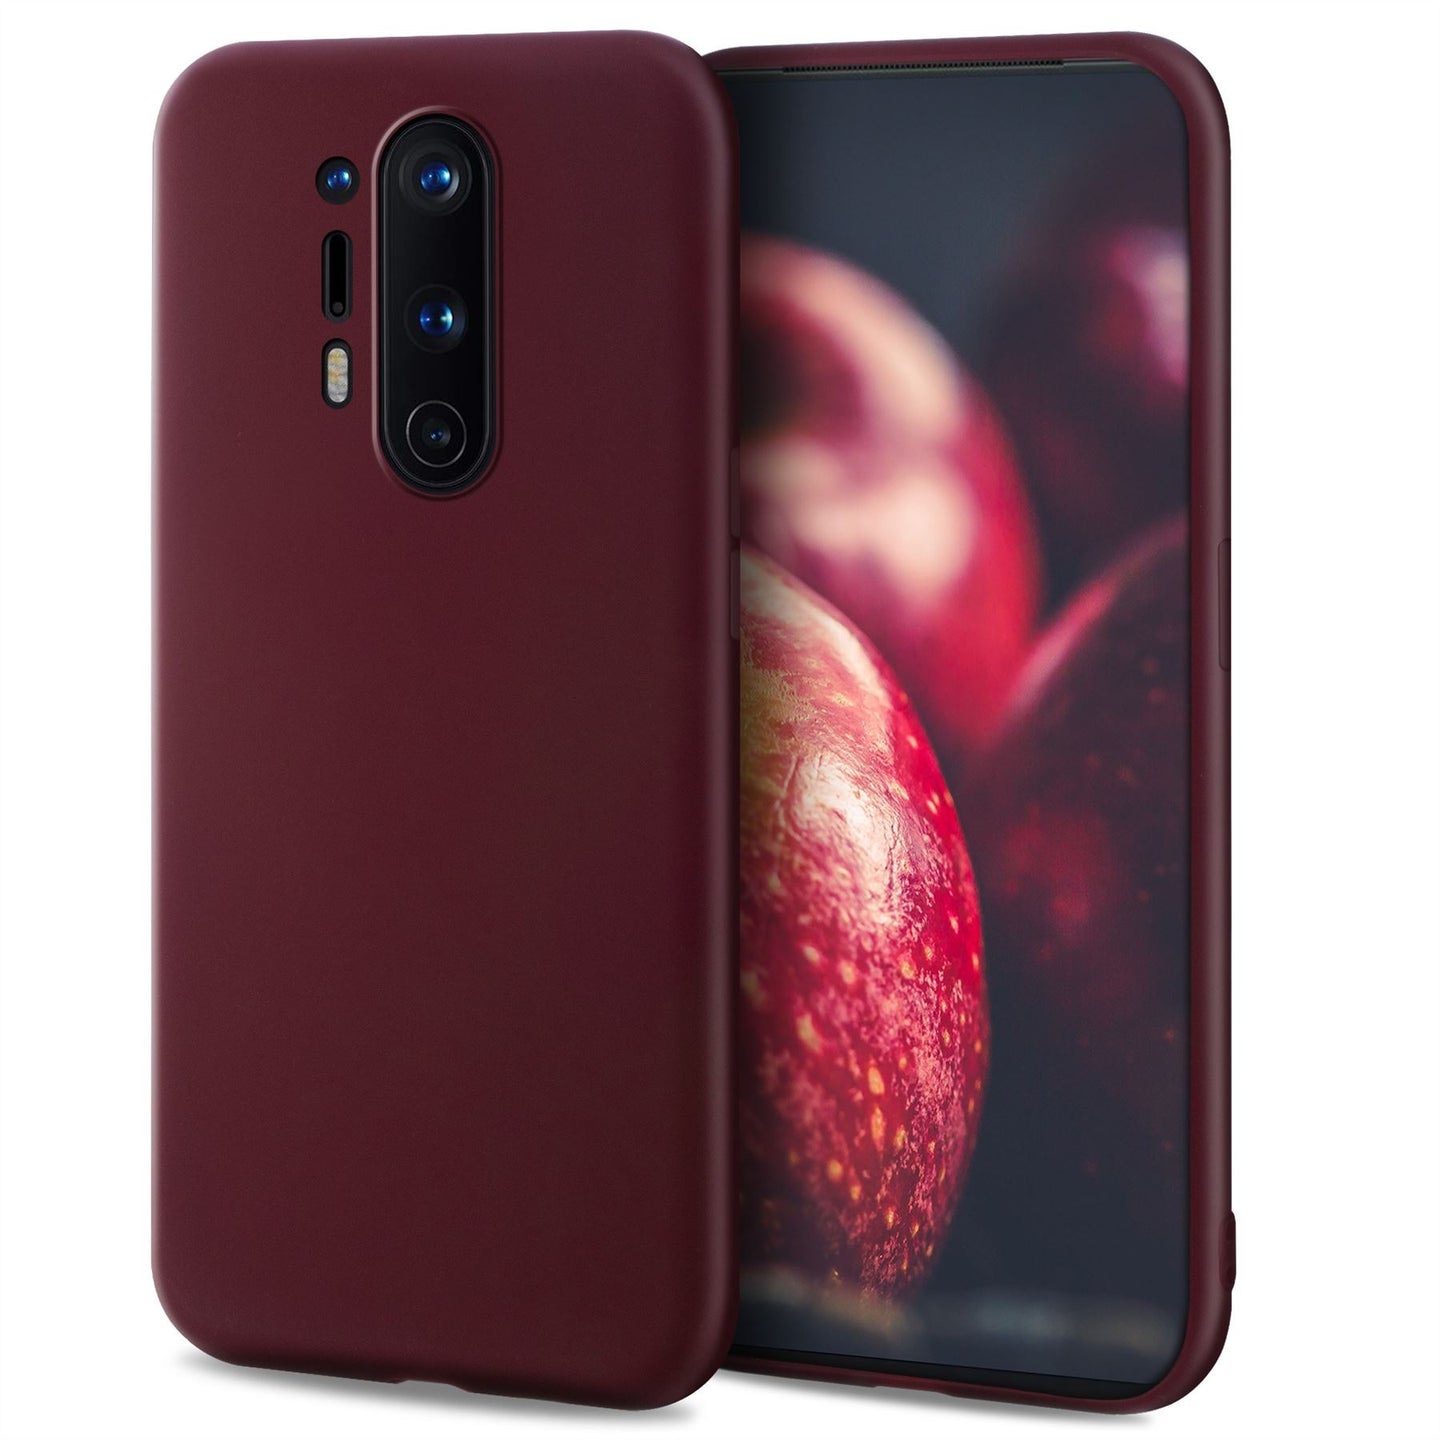 Moozy Minimalist Series Silicone Case for OnePlus 8 Pro, Wine Red - Matte Finish Slim Soft TPU Cover